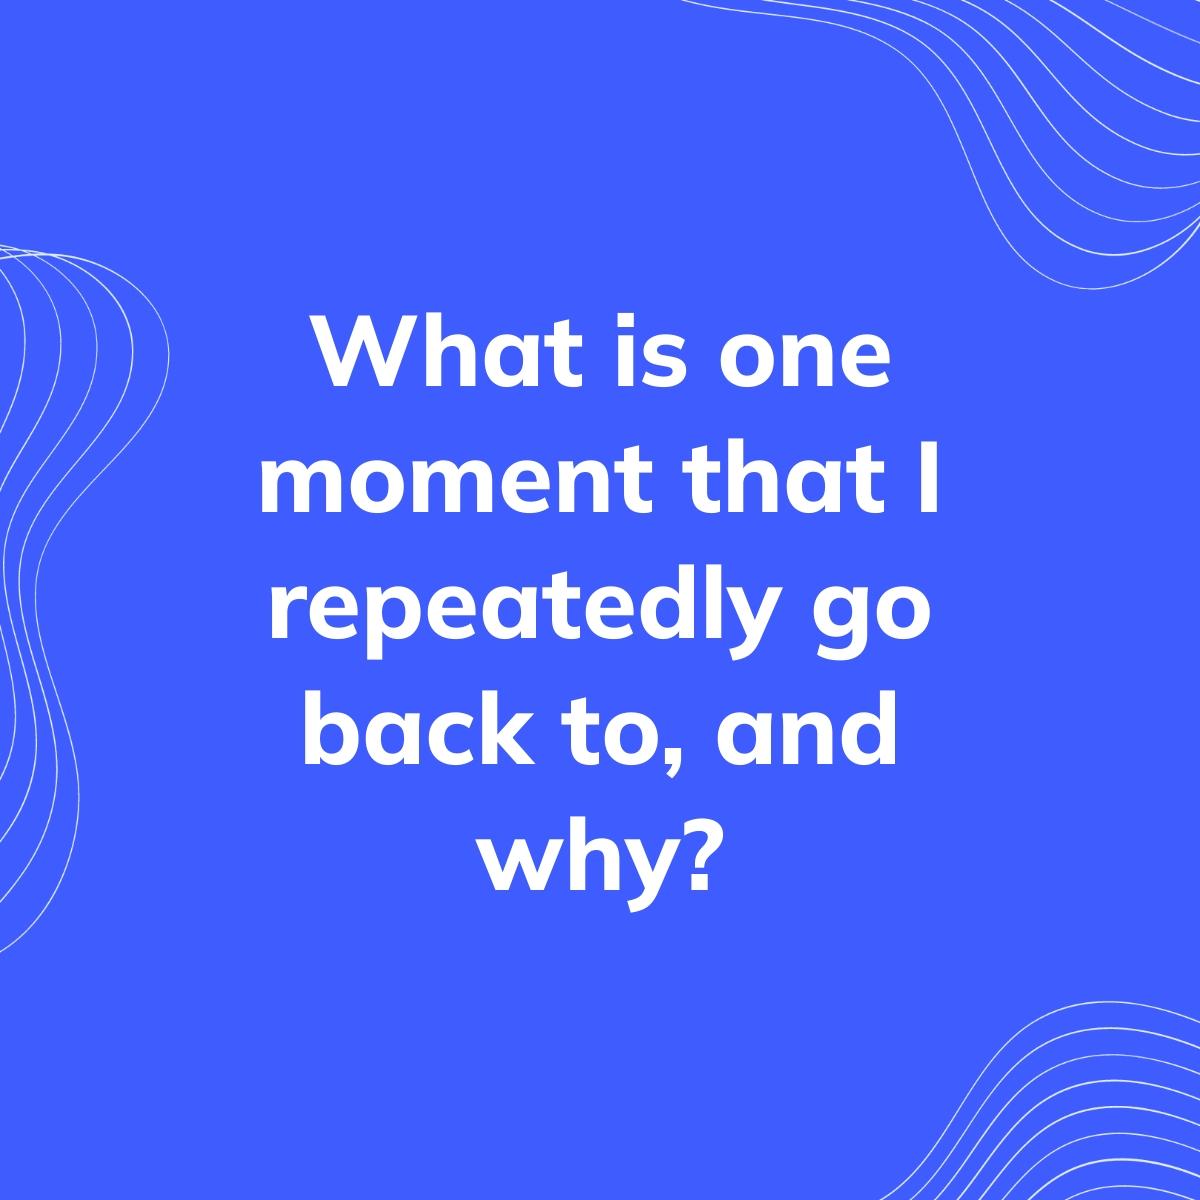 Journal Prompt: What is one moment that I repeatedly go back to, and why?